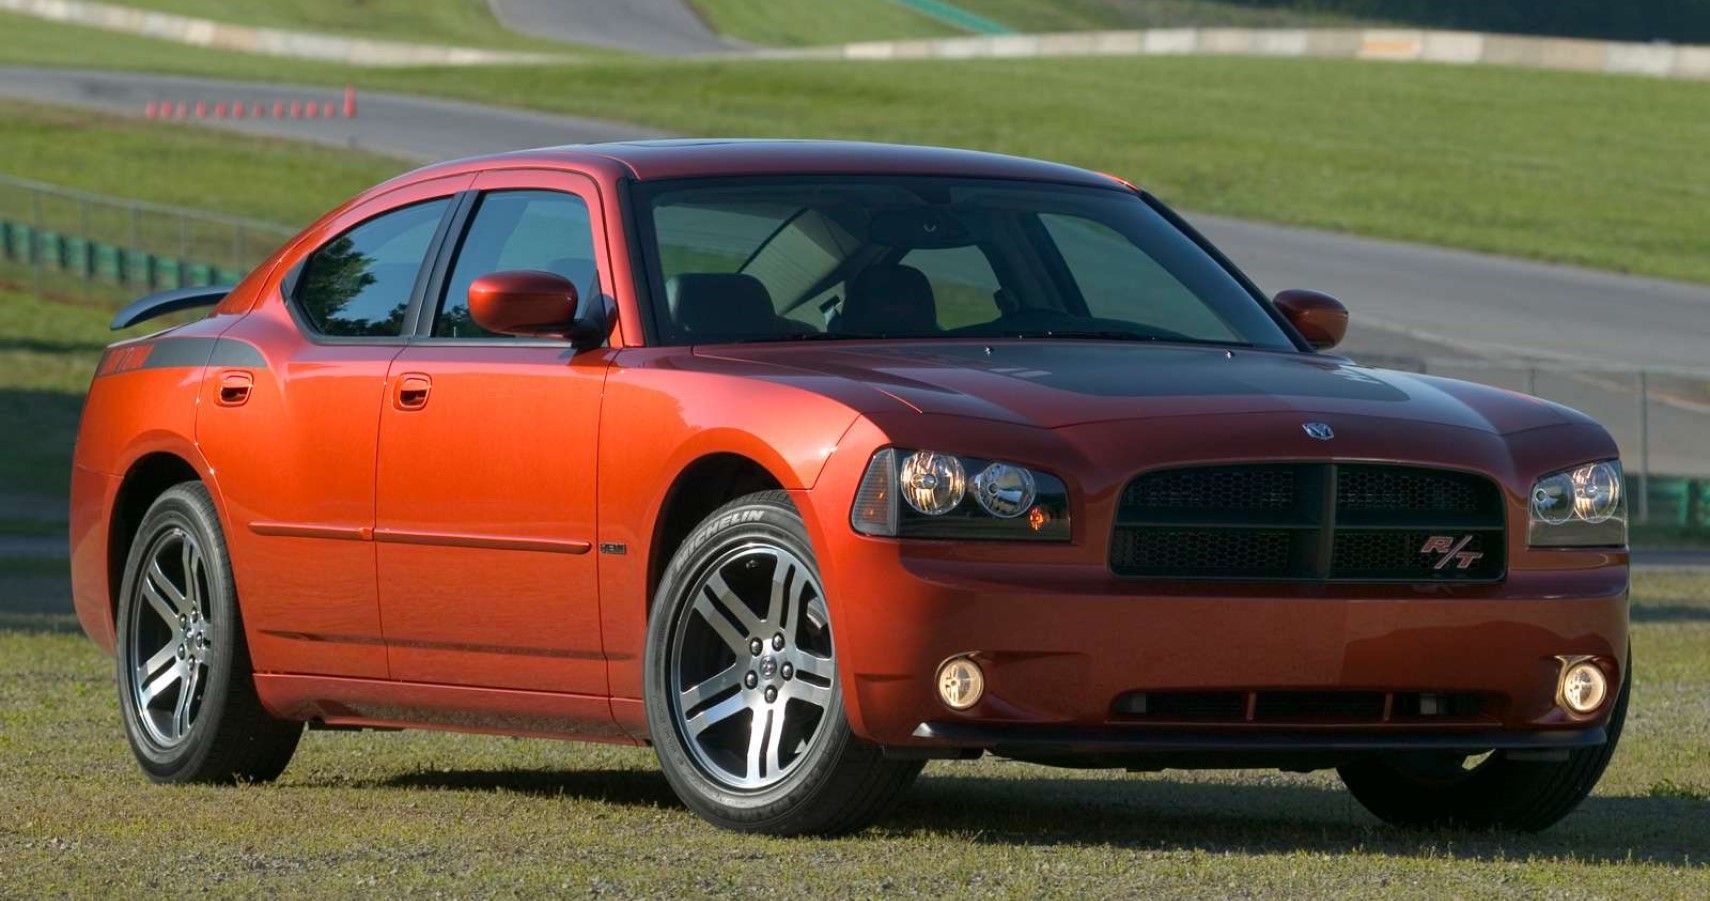 2006 Dodge Charger RT front third quarter 